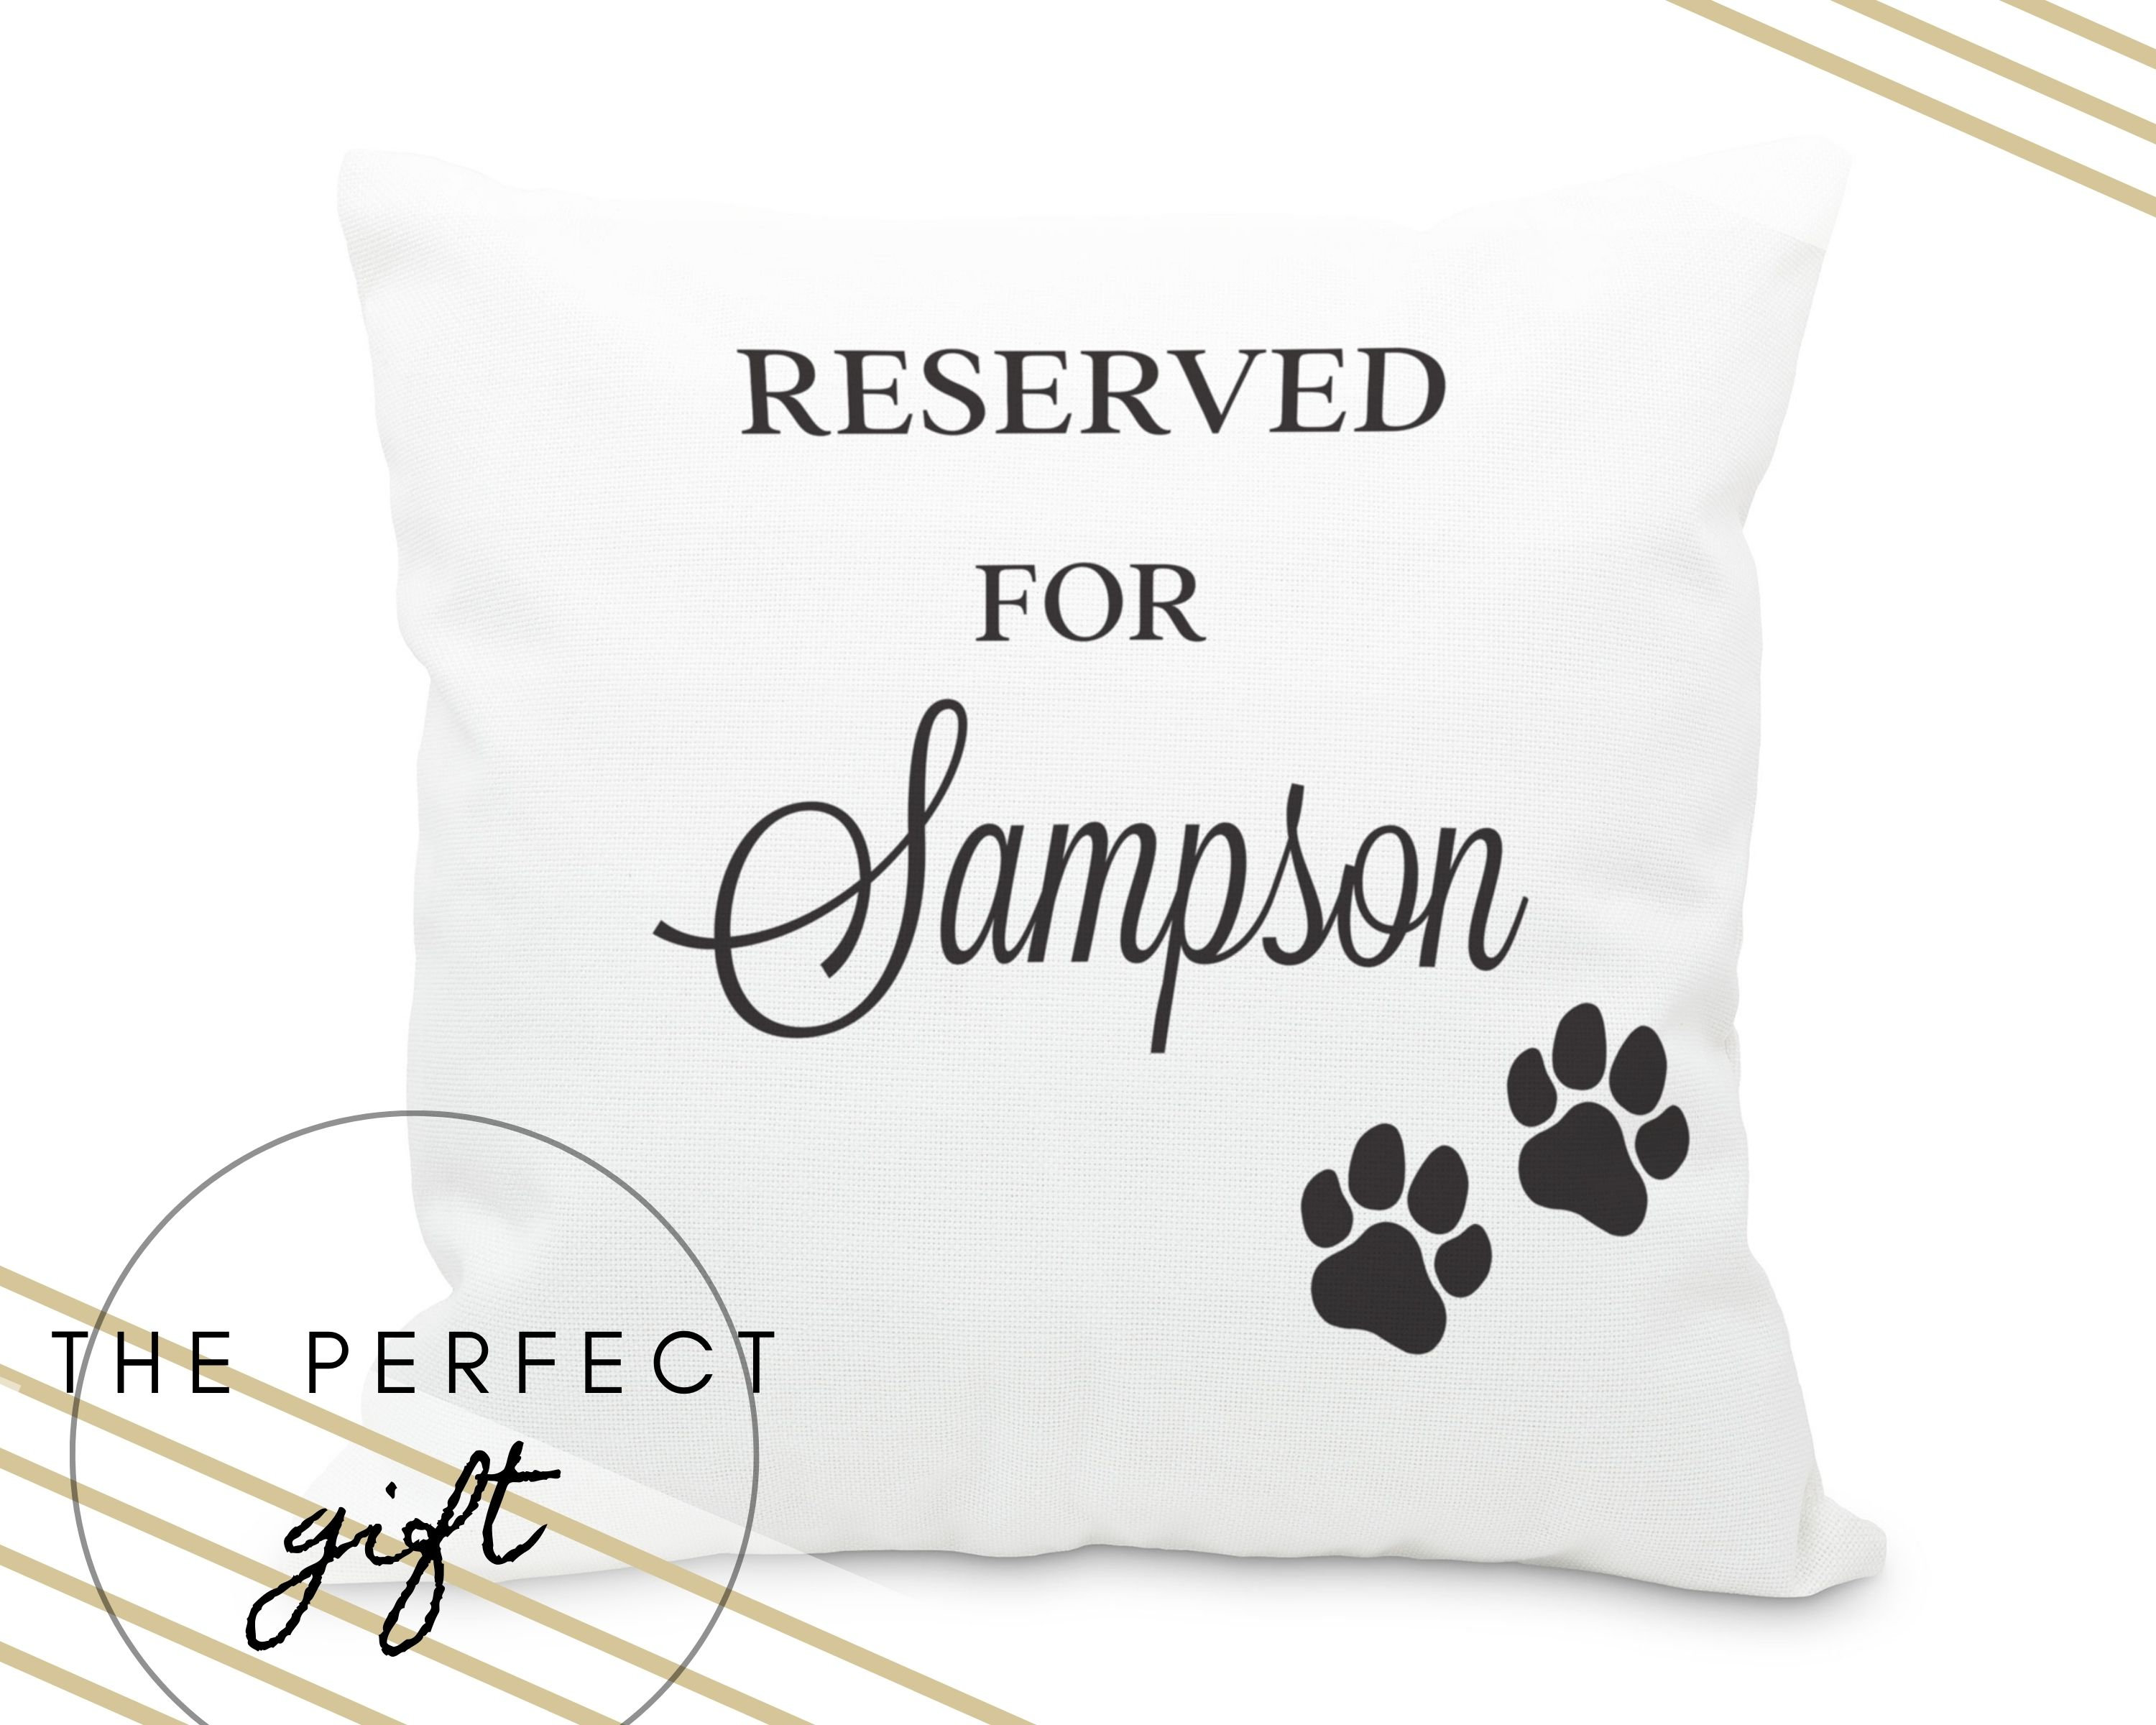 Personalized Pet Pillow Cover With Insert Paw Print Design 